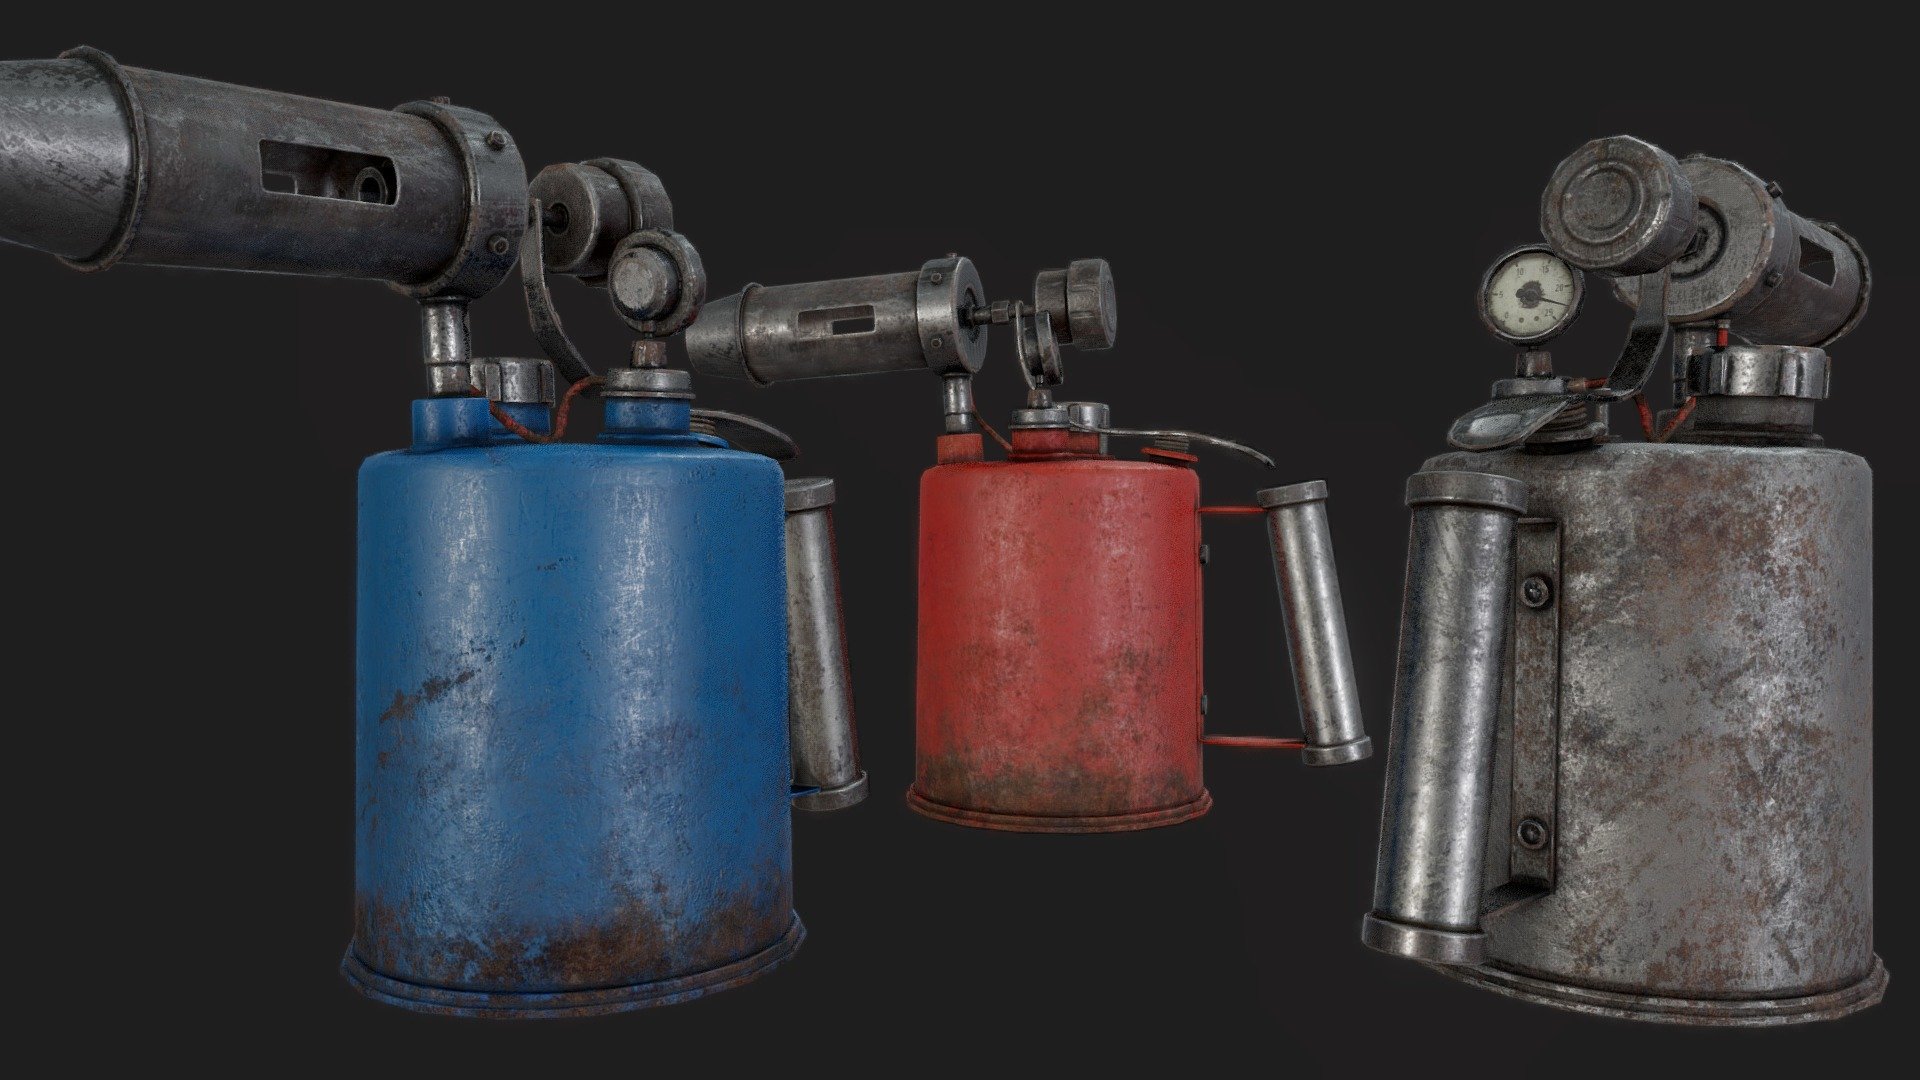 Very Detailed Low Poly old Antique Blowtorch with High-Quality PBR Texturing.

Fits perfect for any PBR game such as Survival, or other genres, and perfect as a Weapon, Tool, or Decoration.

The Mesh is unwrapped, and UV Mapped PBR Painted

Standard Textures 
Base Color, Metallic, Roughness, Height, AO, Normal, Maps

Unreal 4 Textures 
Base Color, Normal, OcclusionRoughnessMetallic

Unity 5/2017 Textures 
Albedo, SpecularSmoothness, Normal, and AO Maps

2048x2048 TGA Textures

Please Note, this PBR Textures Only.

I also included the Gauge Pointer seperated so it can be animated

Low Poly Triangles

8528 Tris 
4475 Verts

File Formats :

.Max2018 
.Max2017 
.Max2016 
.Max2015 
.FBX 
.OBJ 
.3DS 
.DAE - Old Blowtorch PBR - Buy Royalty Free 3D model by GamePoly (@triix3d) 3d model